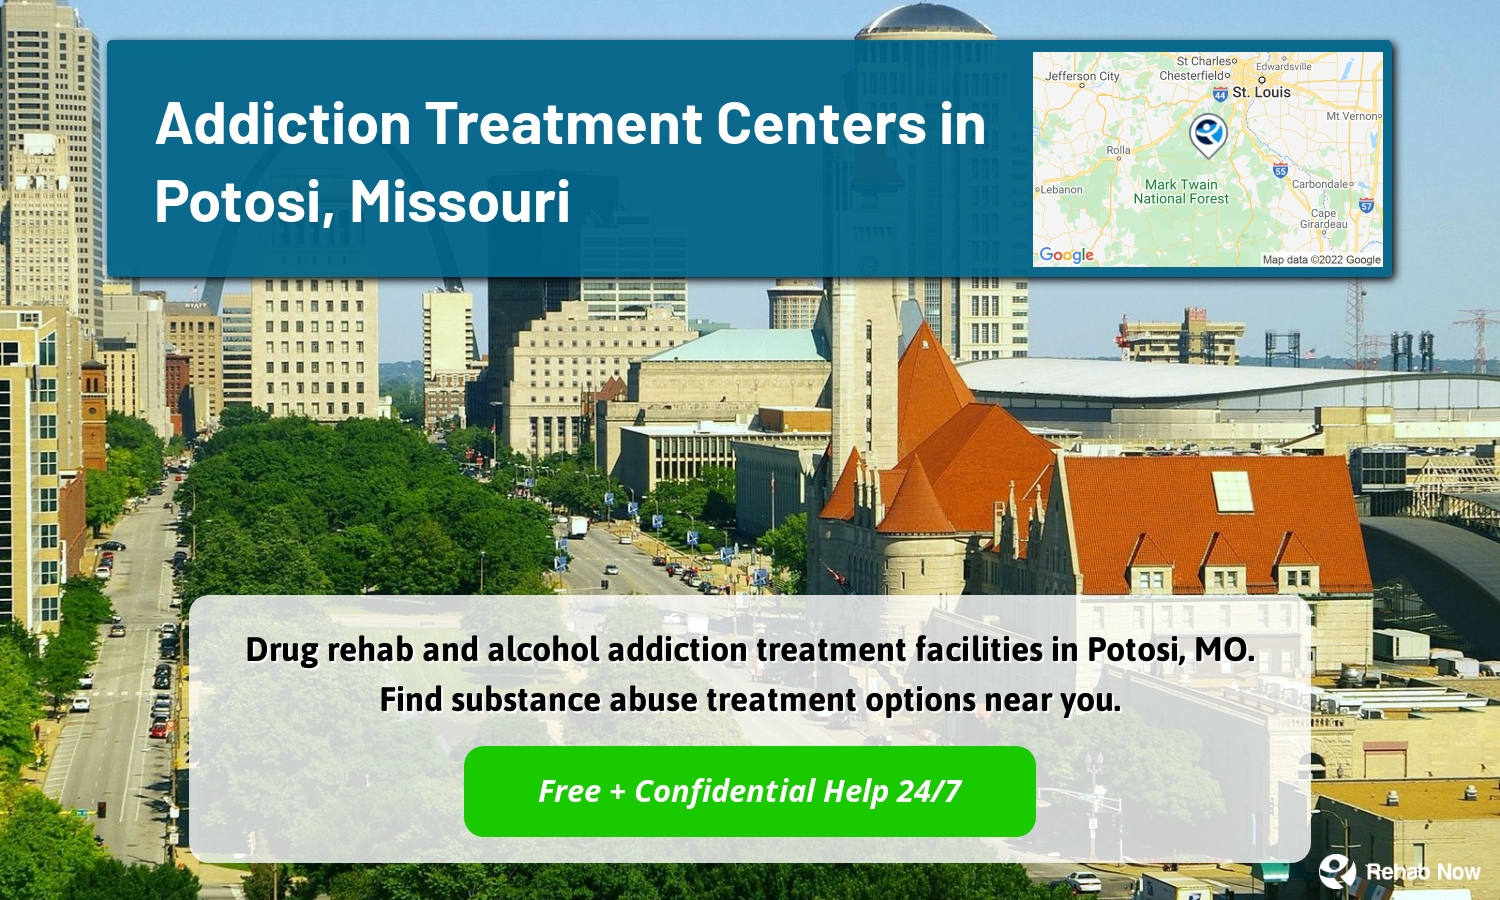 Drug rehab and alcohol addiction treatment facilities in Potosi, MO. Find substance abuse treatment options near you.